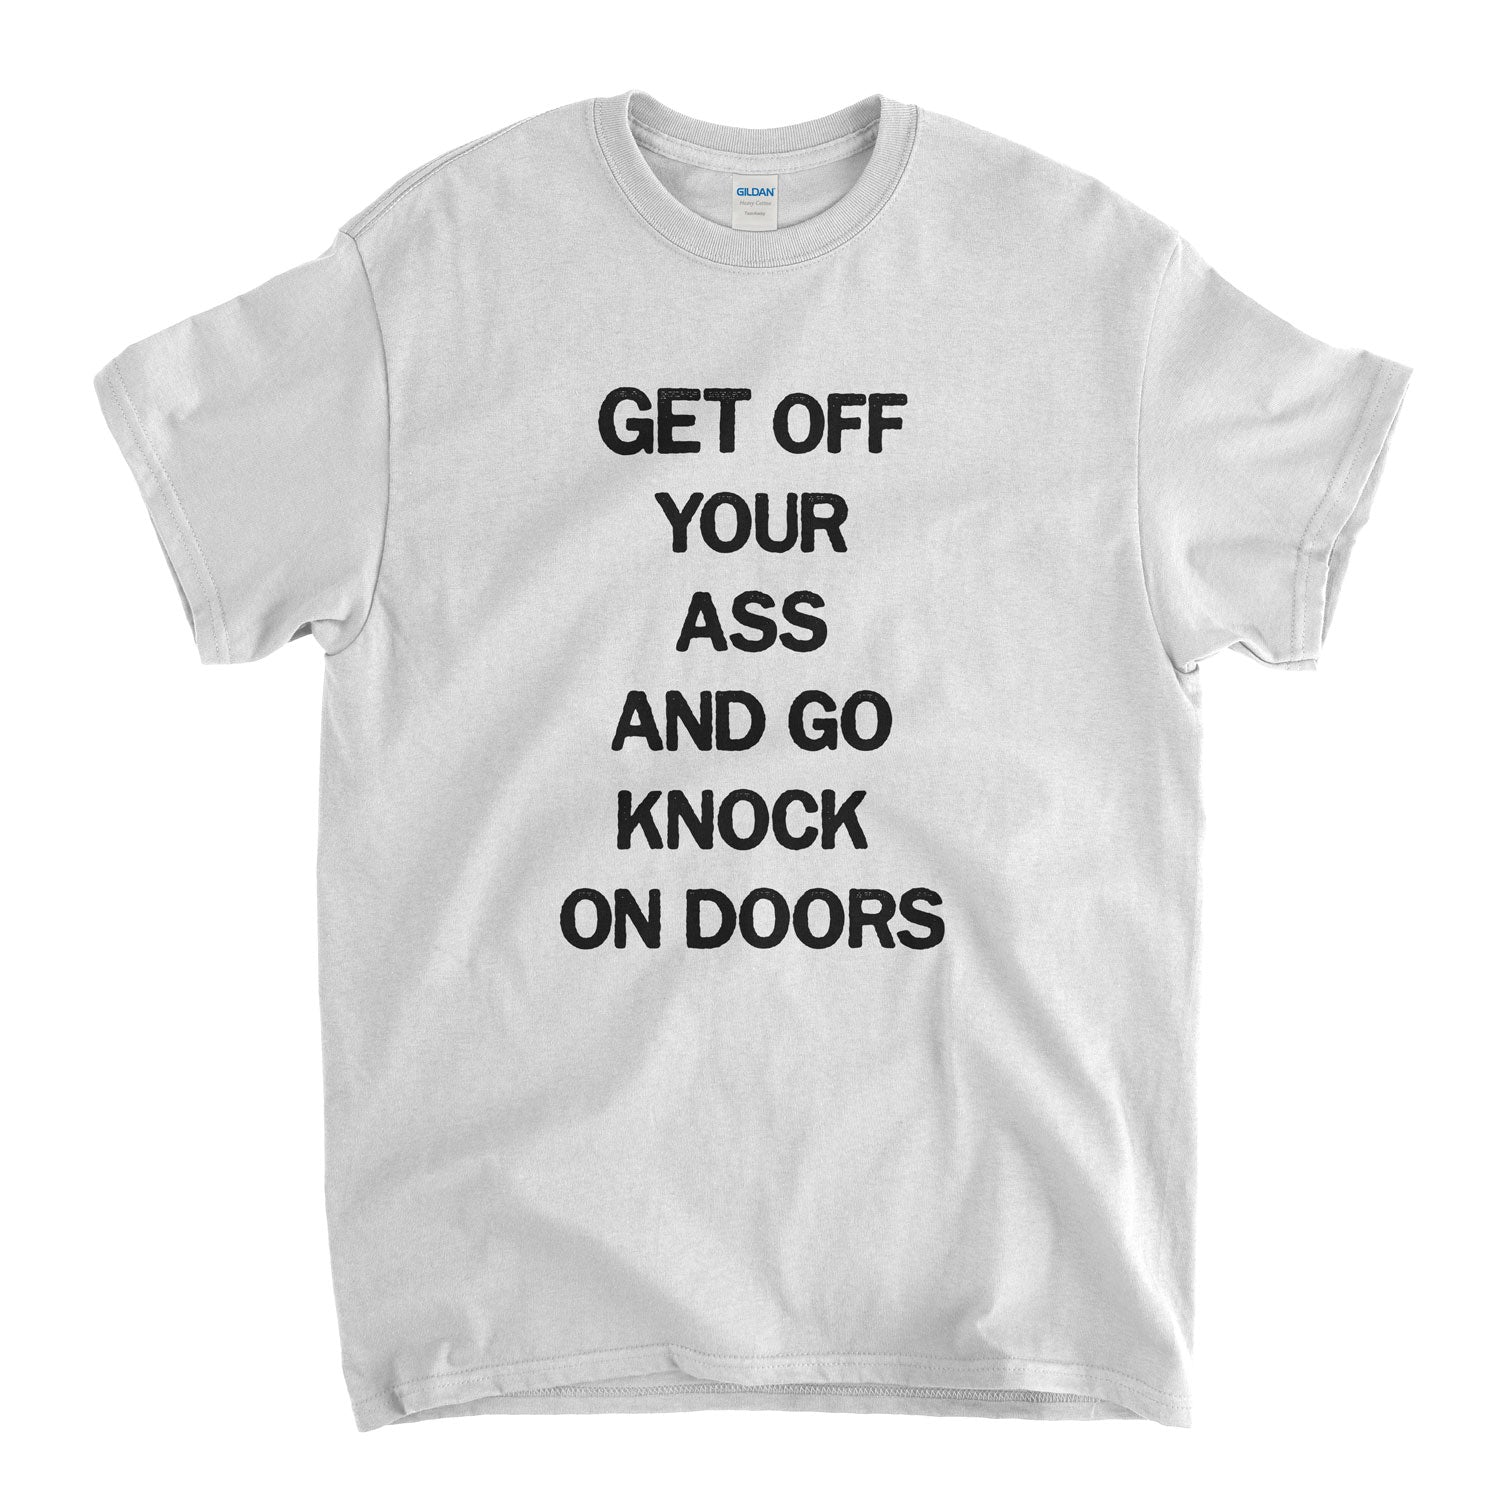 Inspired by Bosch T Shirt - Get Off Your Ass And Go Knock On Doors